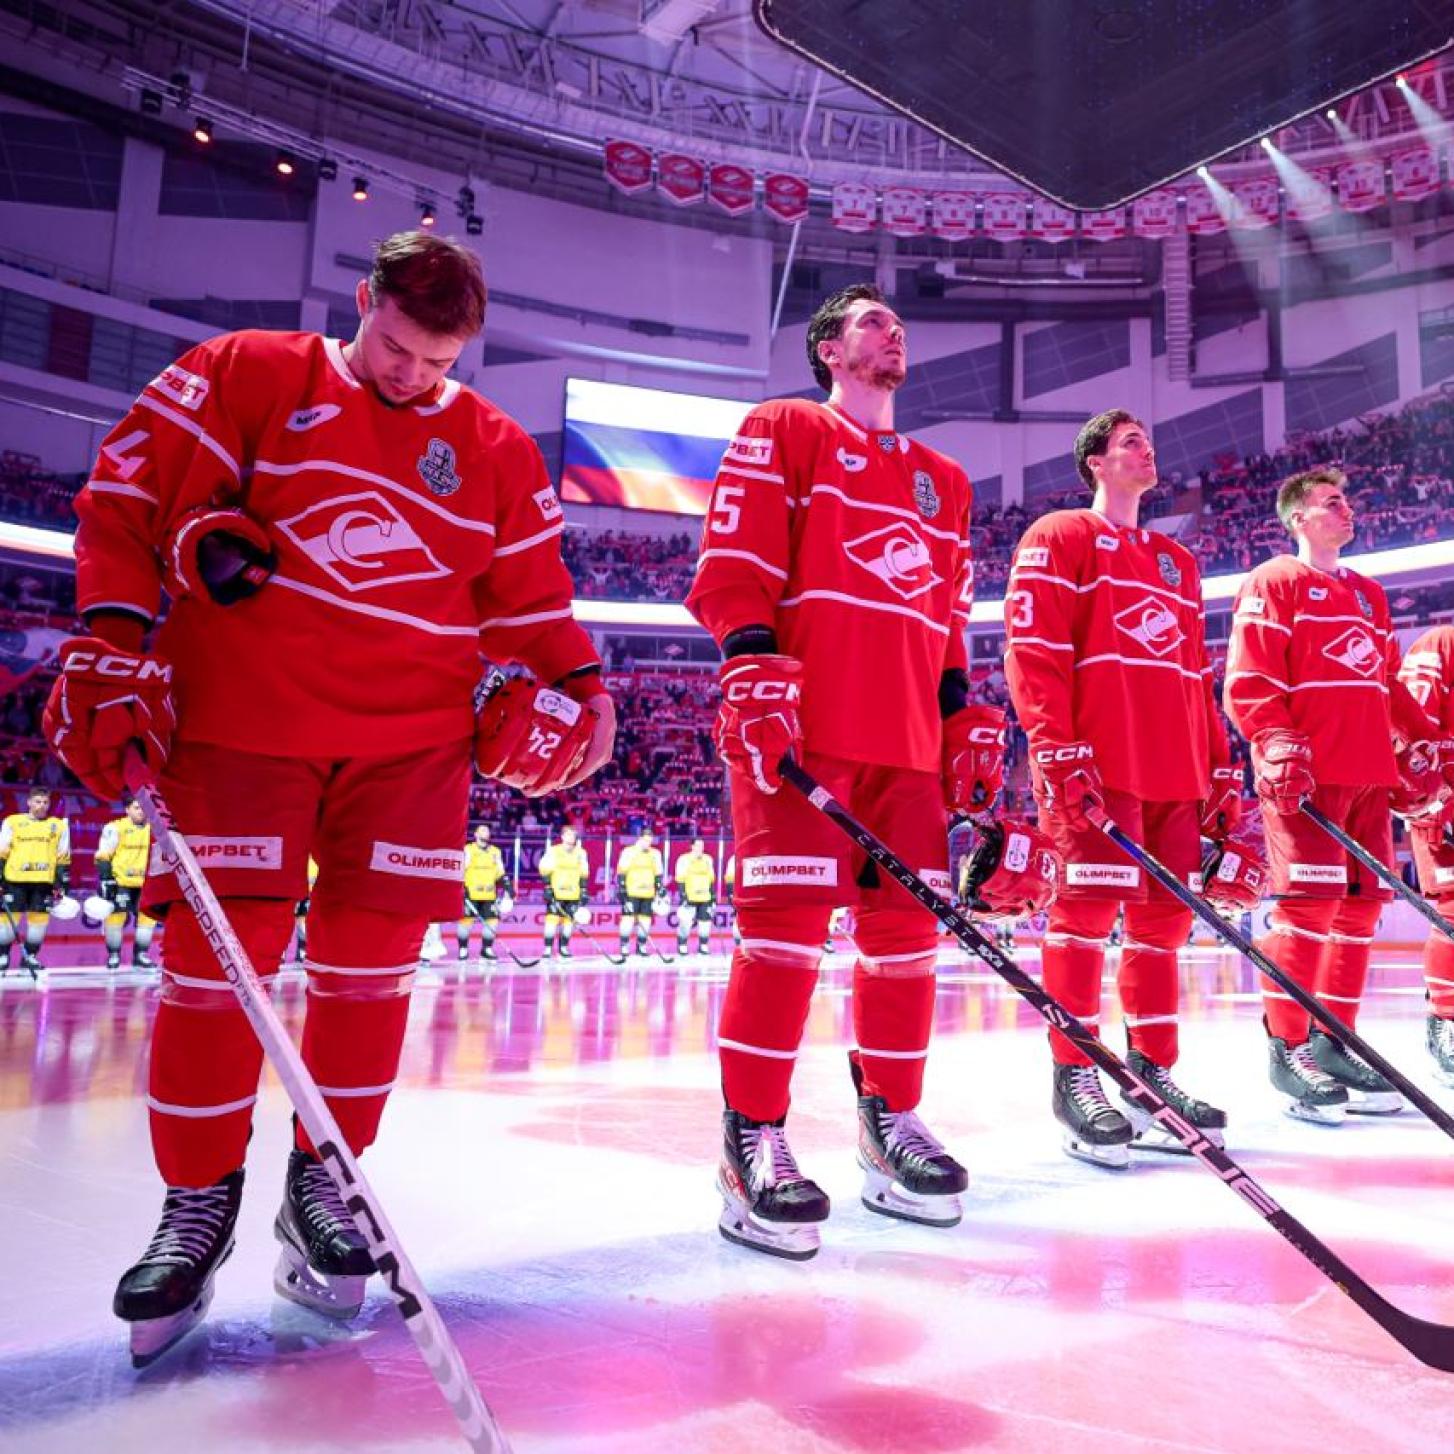 Tickets for Spartak's home matches against Metalurg are on sale!